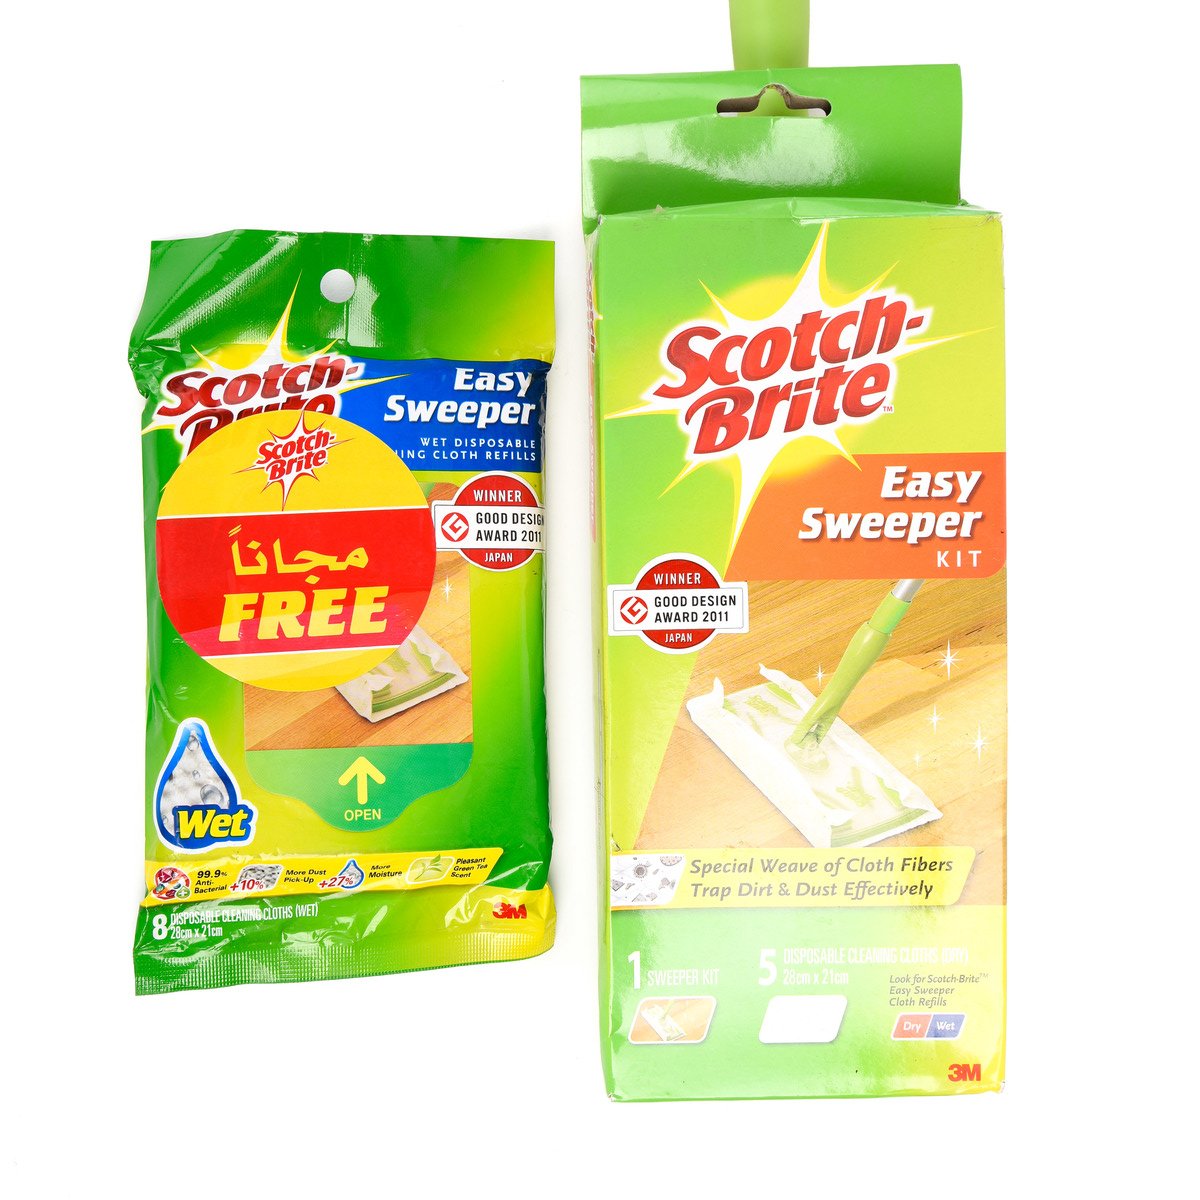 Scotch Brite Easy Sweeper + Wet Disposable Cleaning Cloth Refills